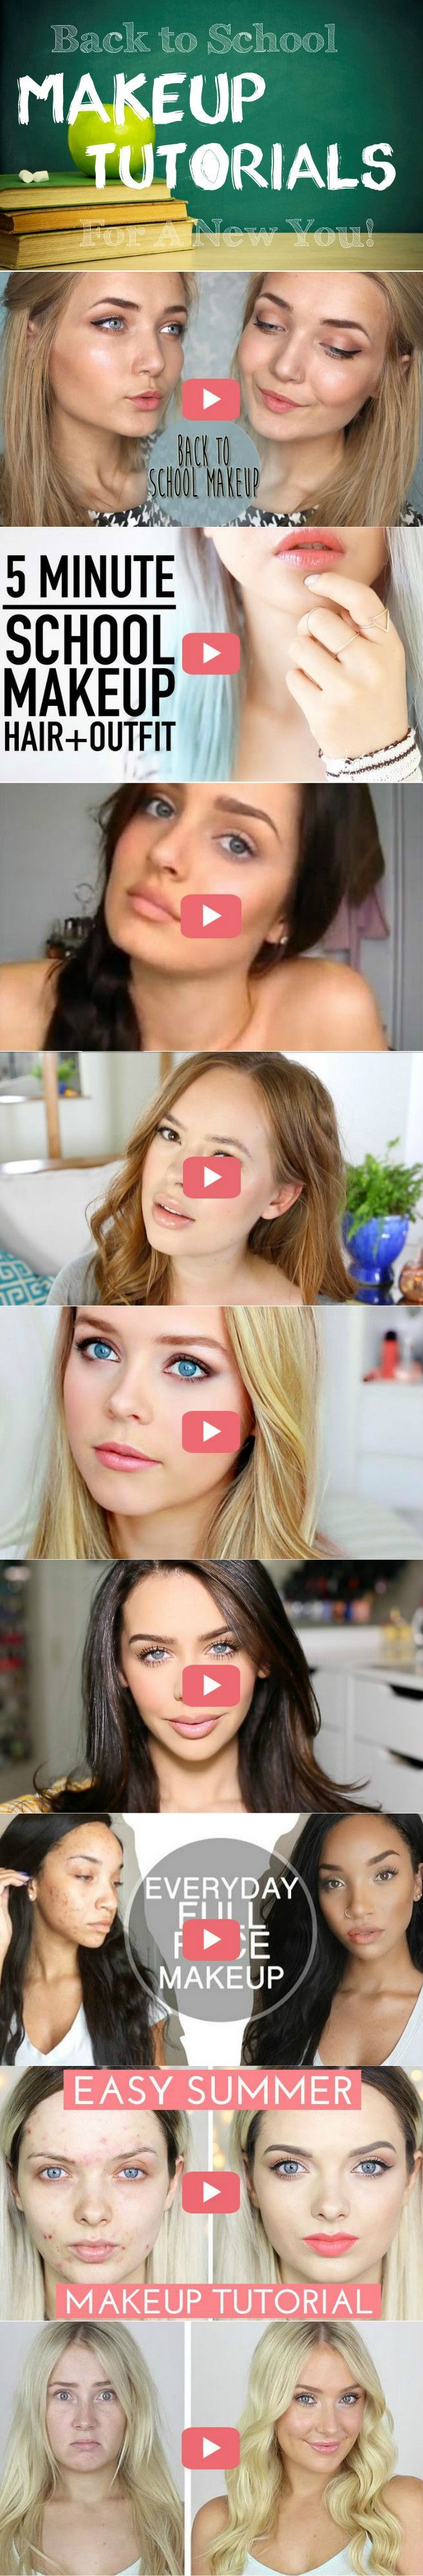 15 Back To School Makeup Tutorials For A New You | Step by Step Video Tutorial b...